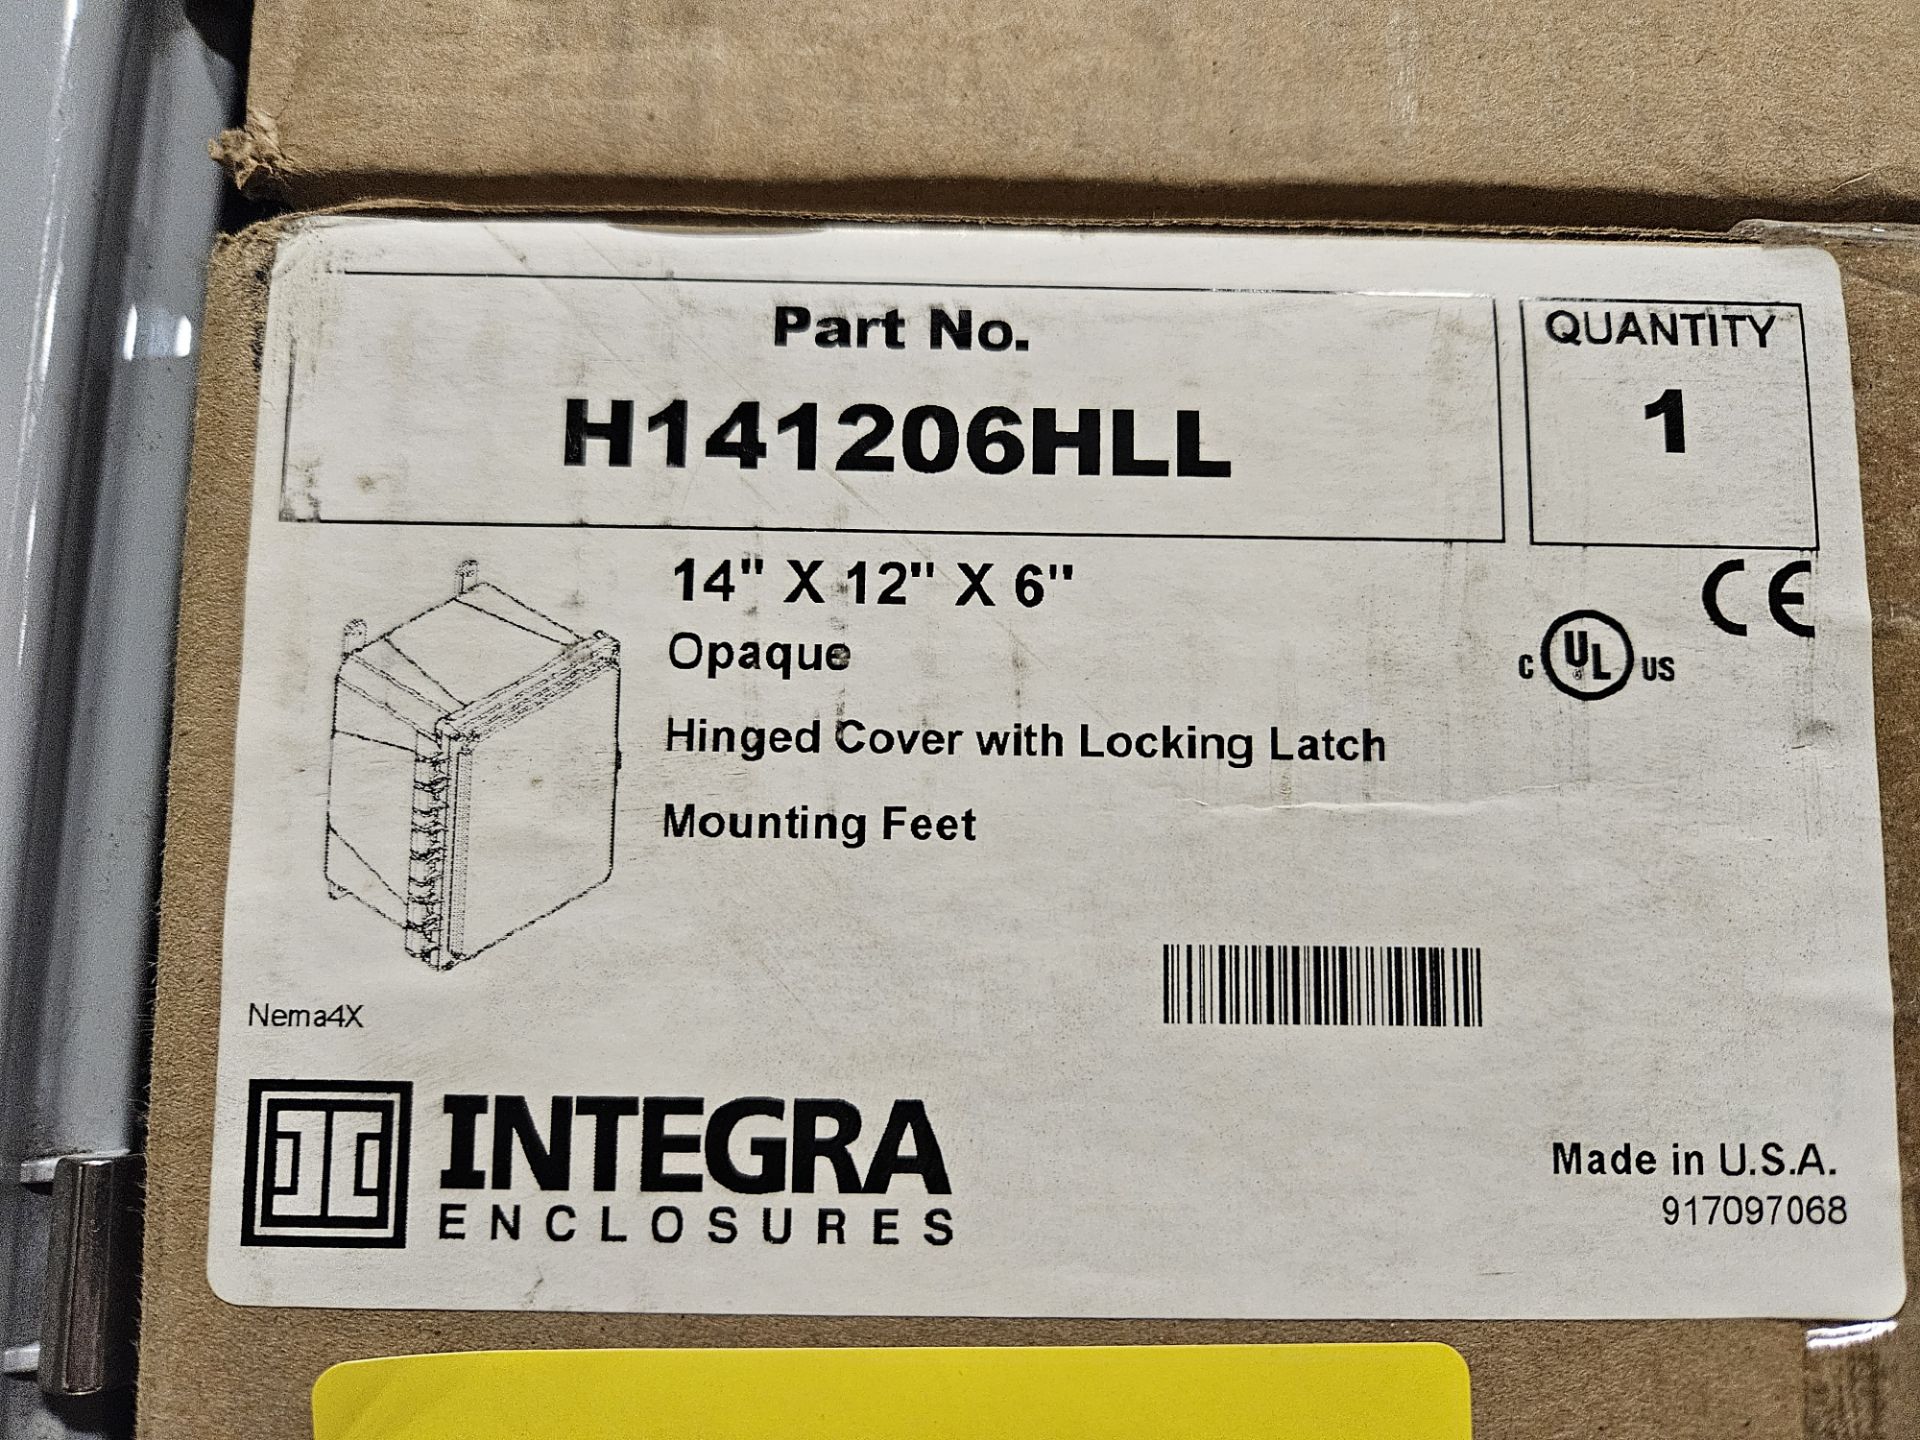 LOT - (3) INTEGRA ENCLOSURES, H141206HLL, 14" X 12" X 6" OPAQUE HINGED COVER W/ LOCKING LATCH, - Image 2 of 6